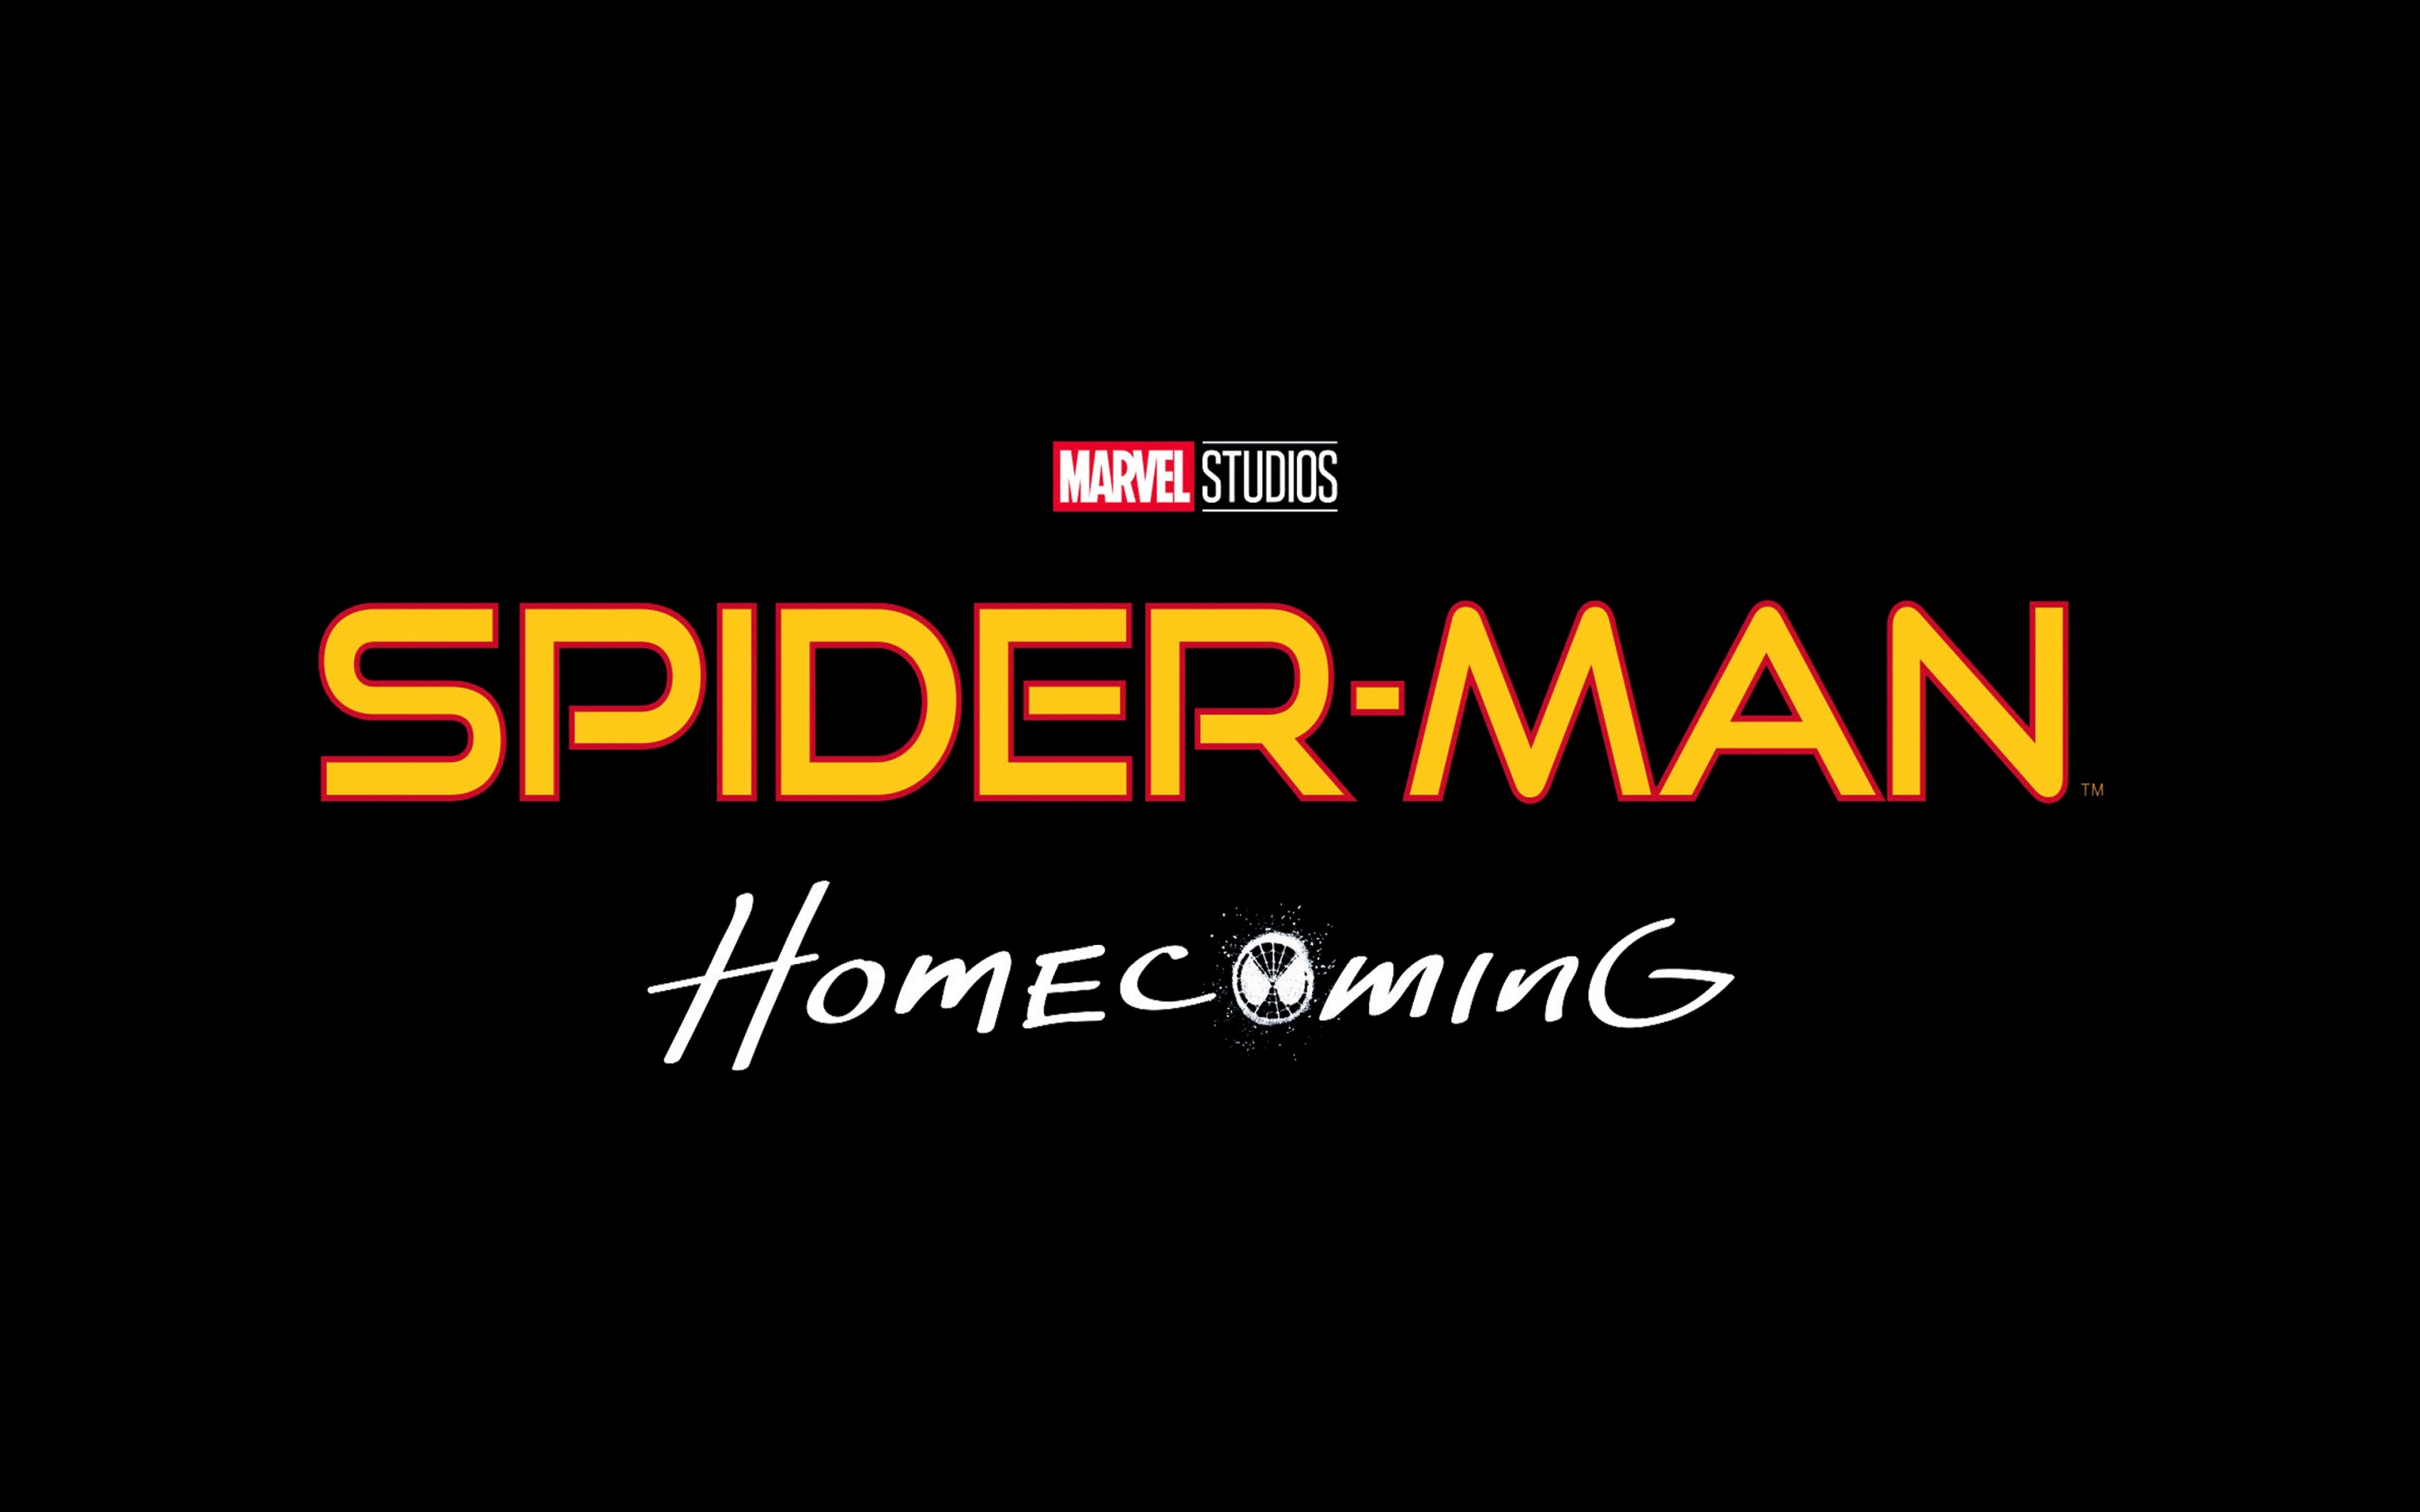 Spiderman Homecoming 2017 for 3200 x 2000 Wide Retina Display resolution